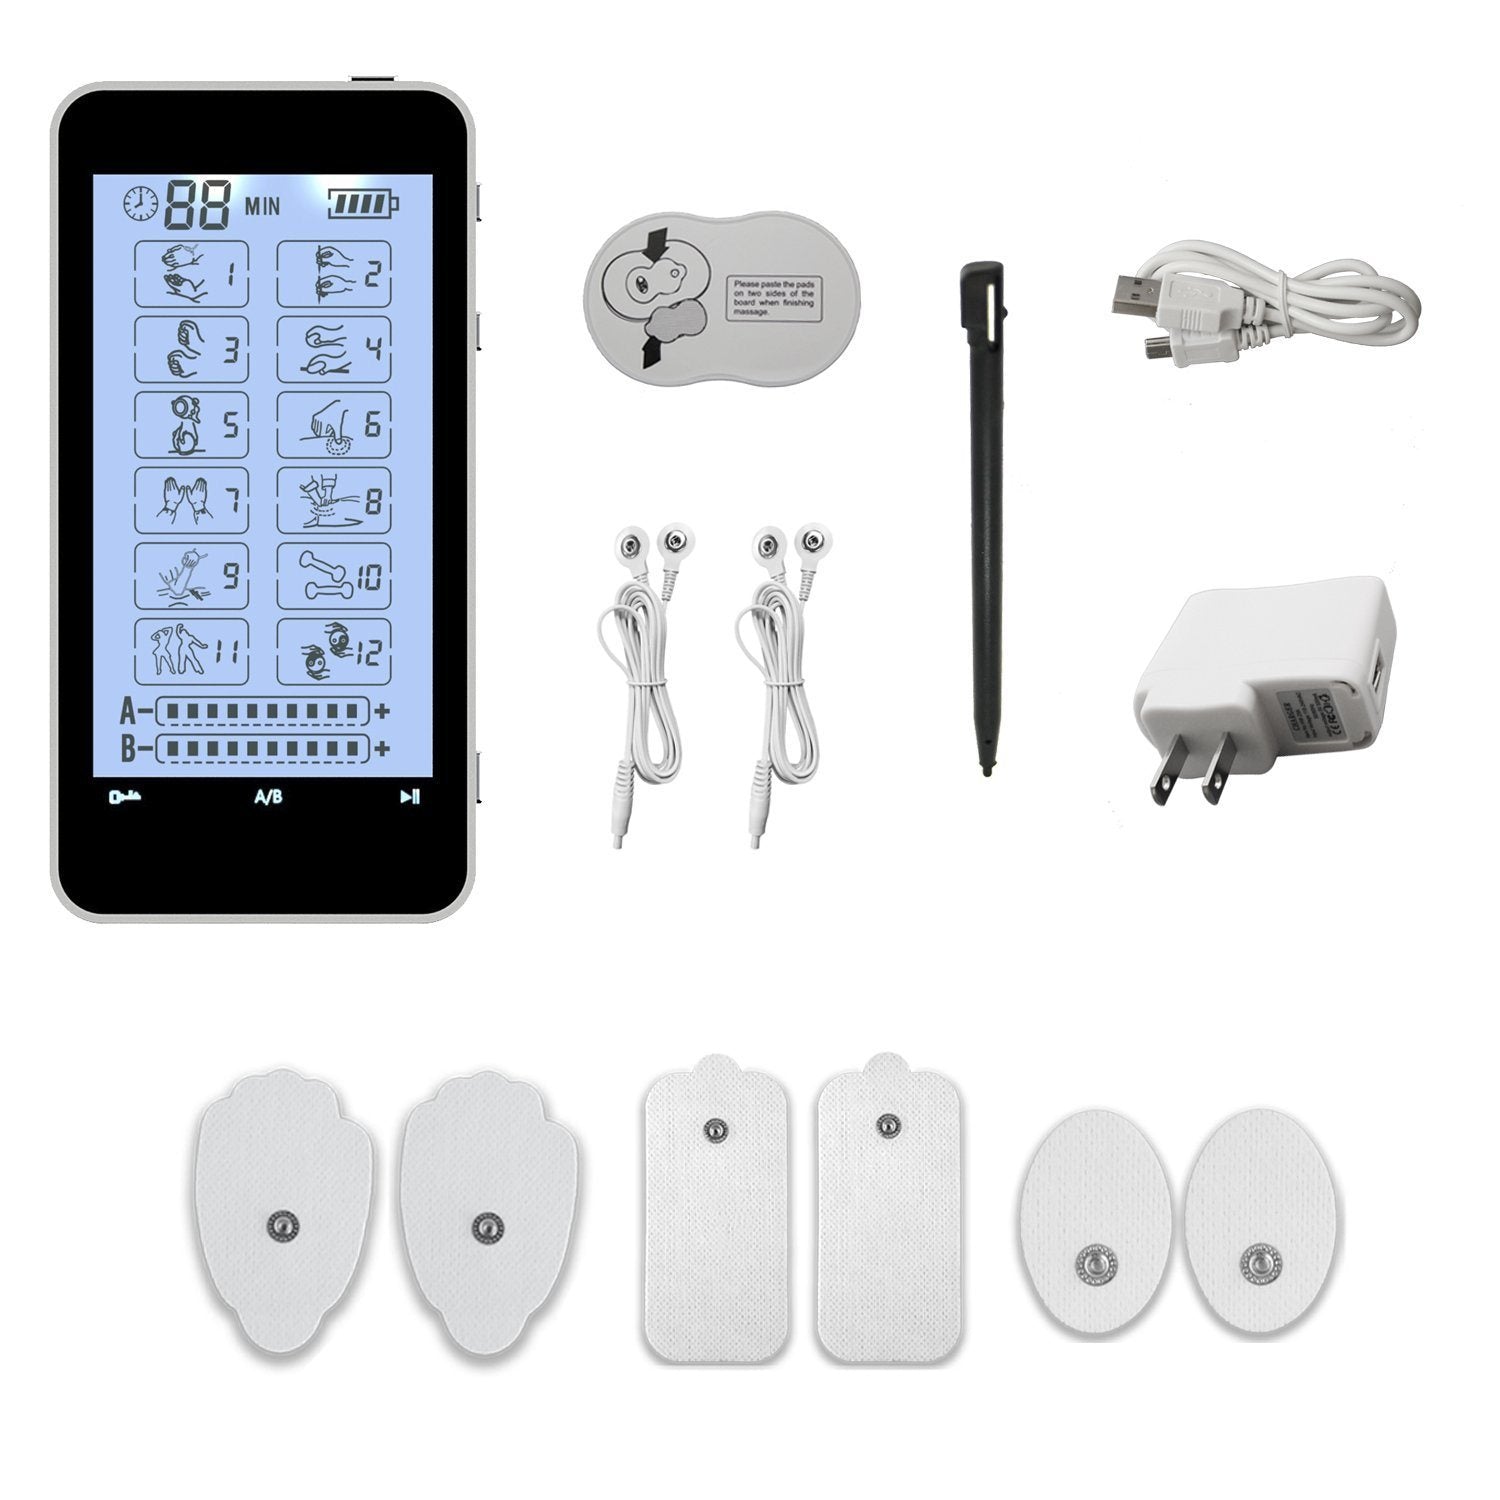 T12AB FDA Cleared 12 mode Touch Screen Pain Relief TENS UNIT - 2 Year Warranty - HealthmateForever.com